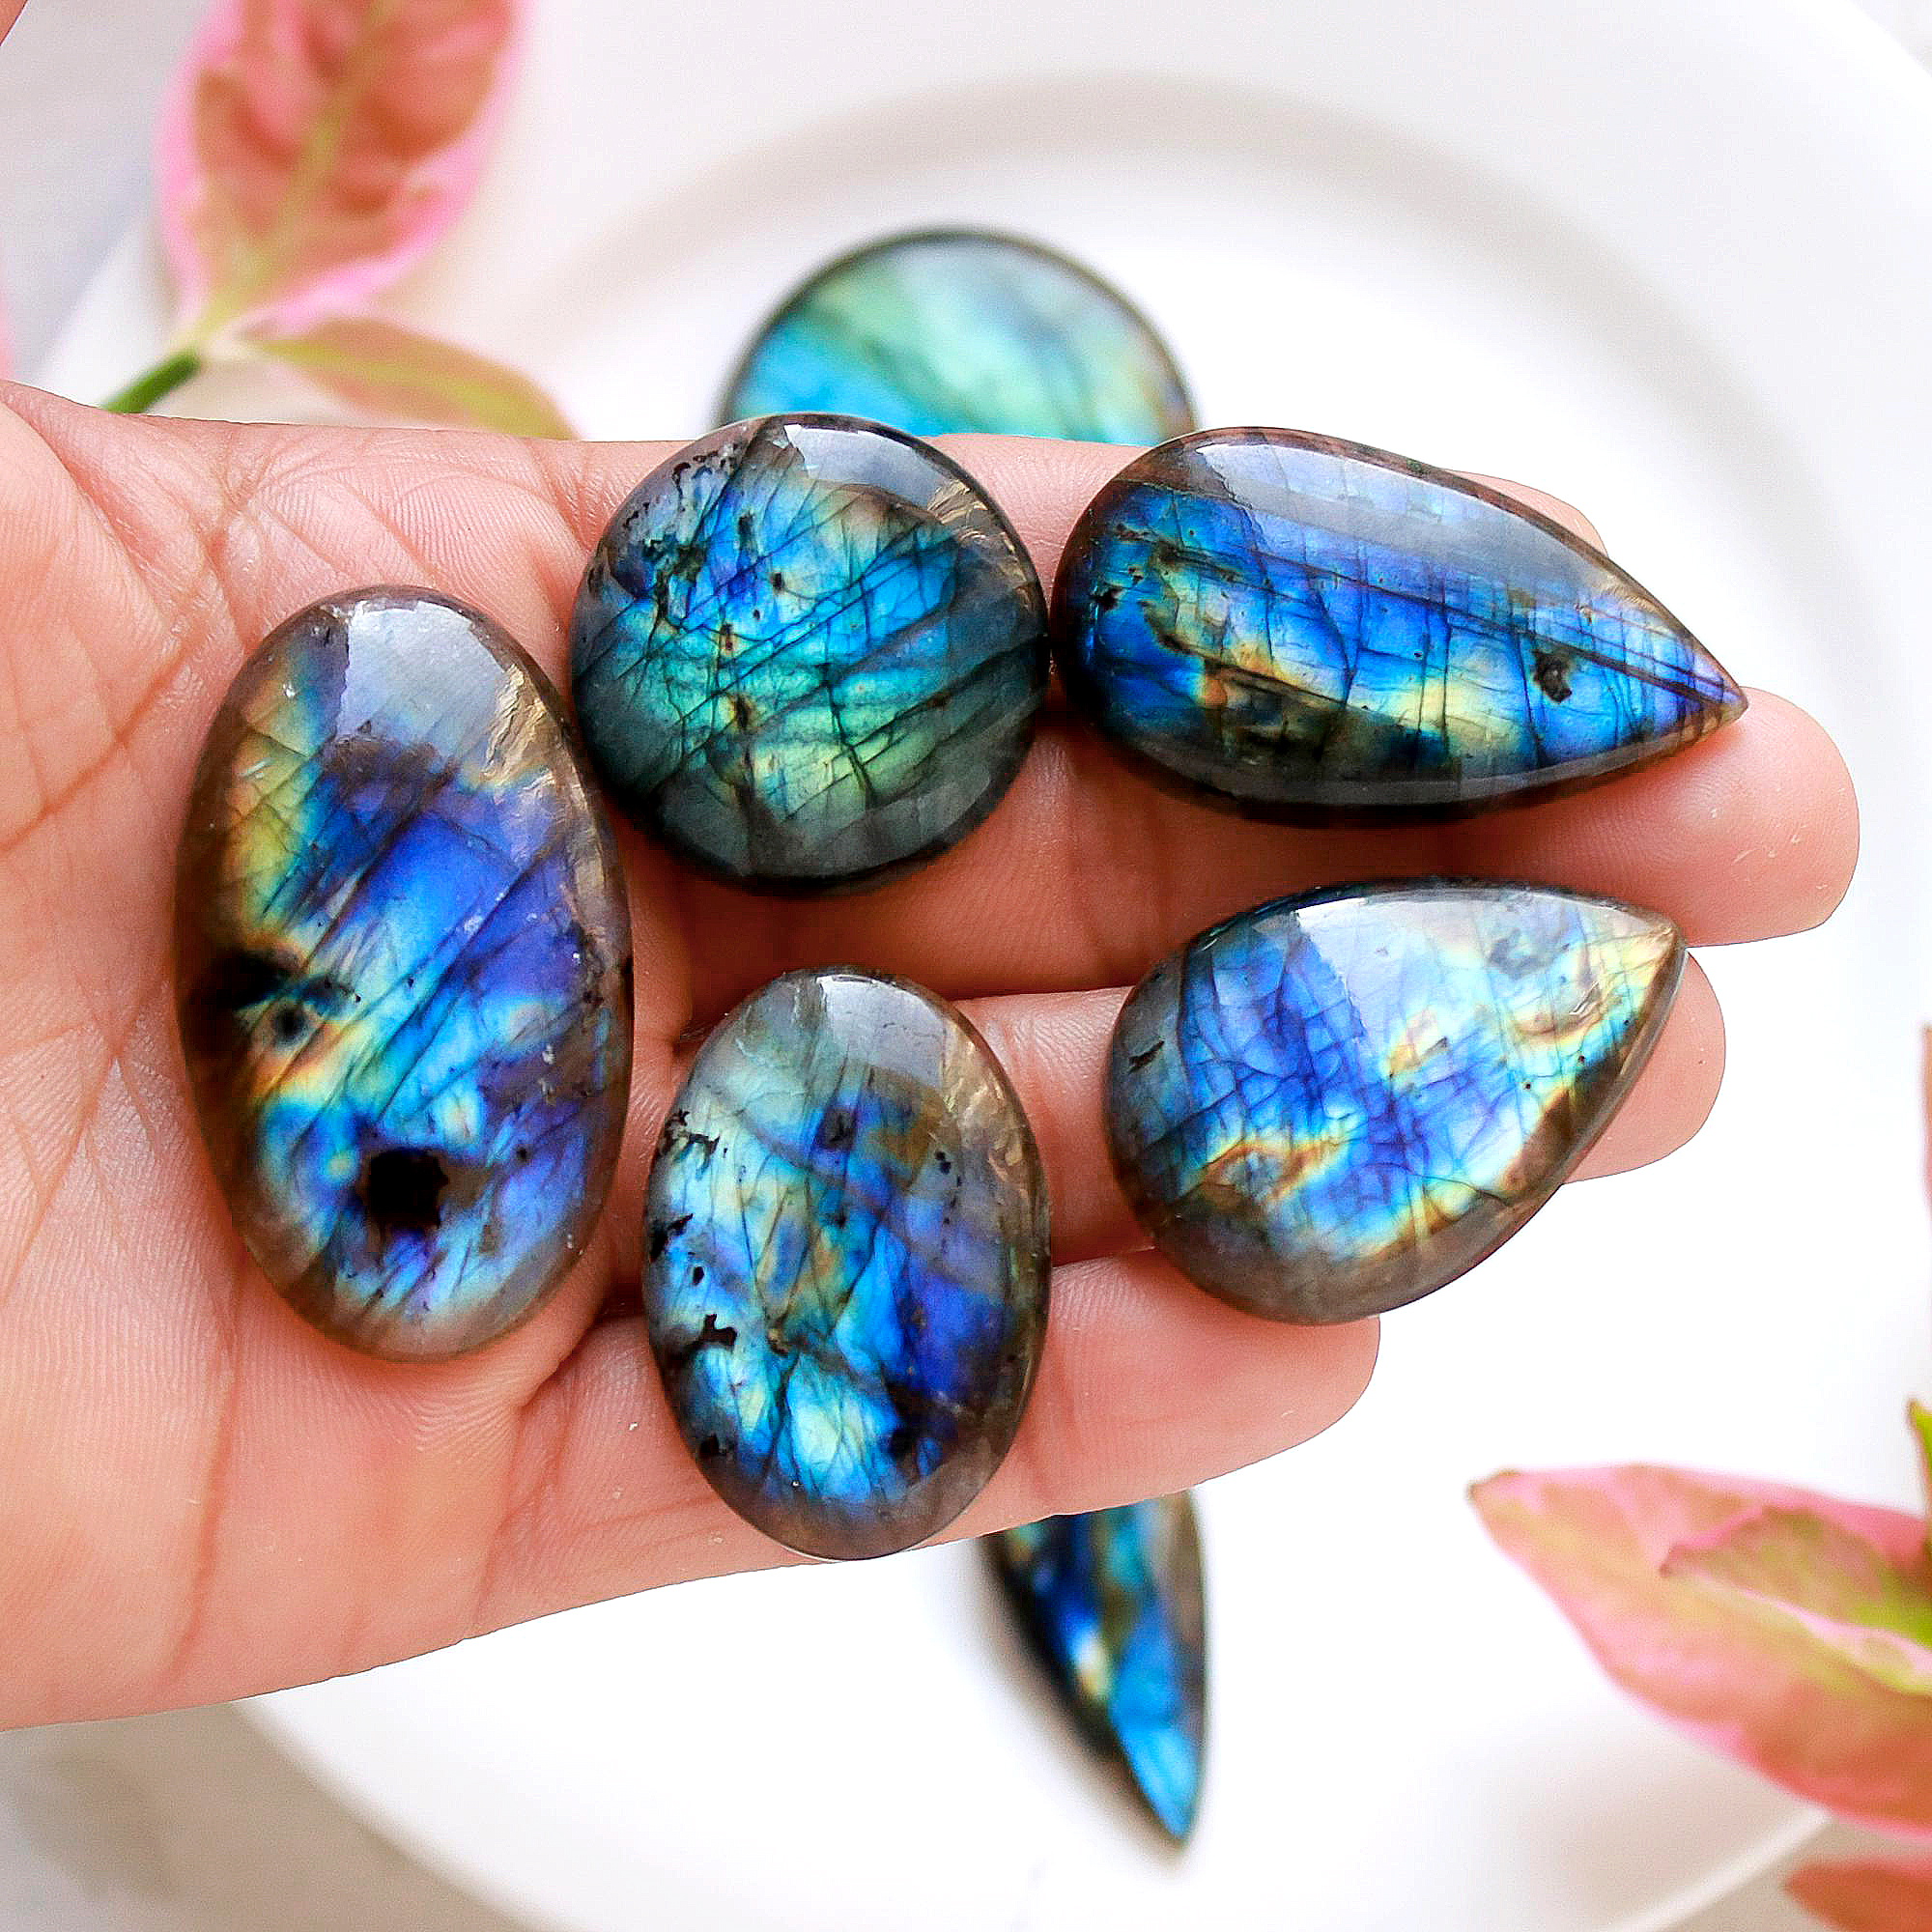 9 Pcs.563 Cts Natural labradorite Cabochon Loose Gemstone For Jewelry Wholesale Lot Size 47x30 37x26mm